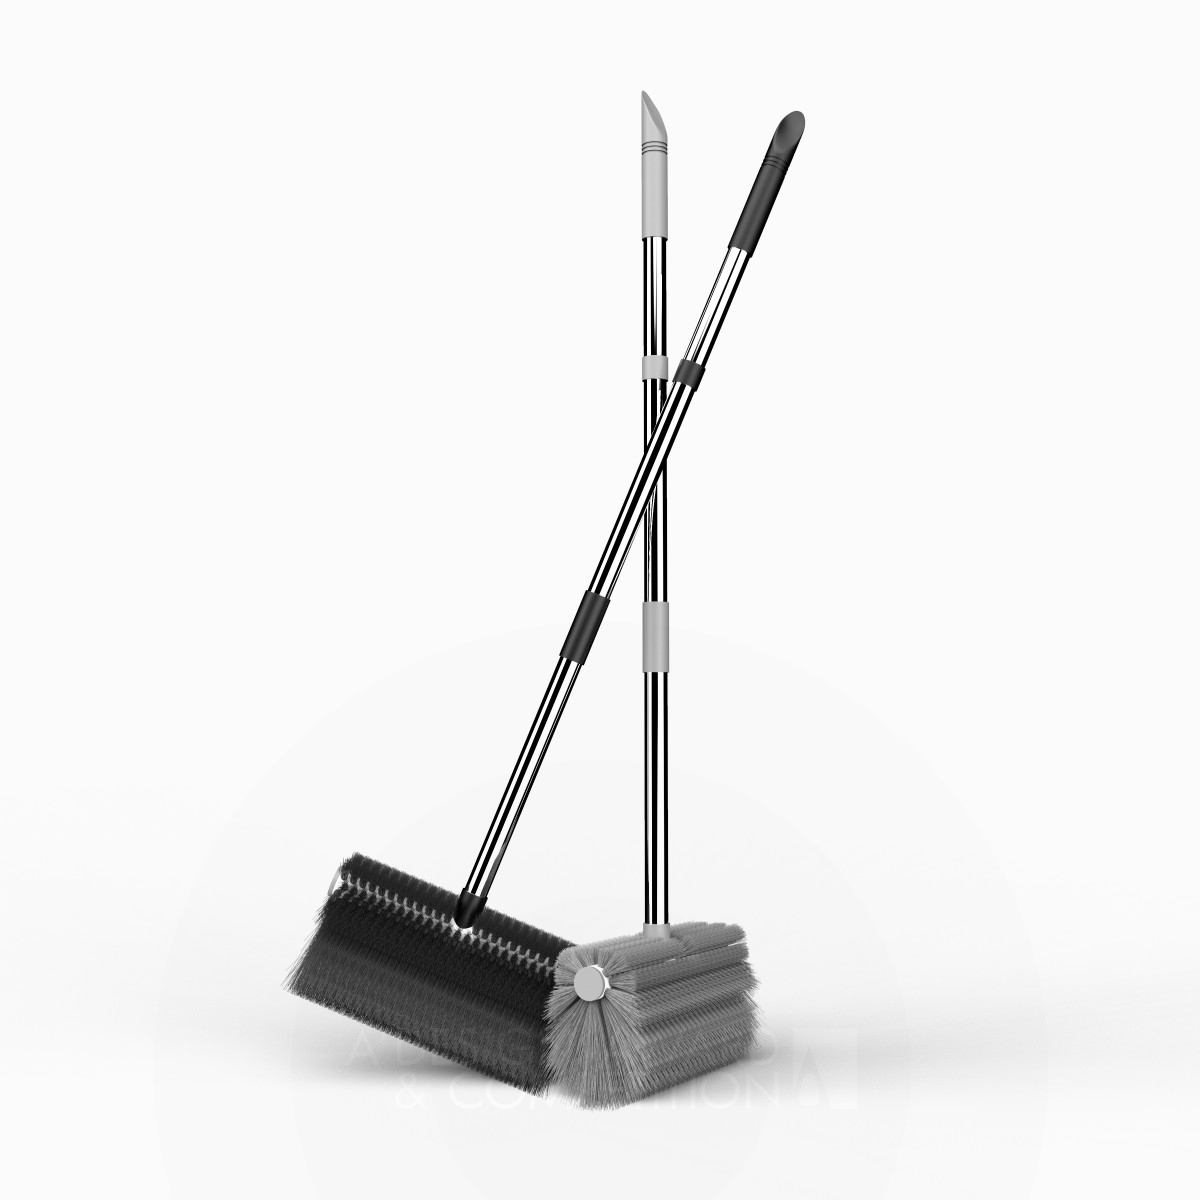 360° Clean Multi Angle Cleaning Broom by Yuhang Li Team